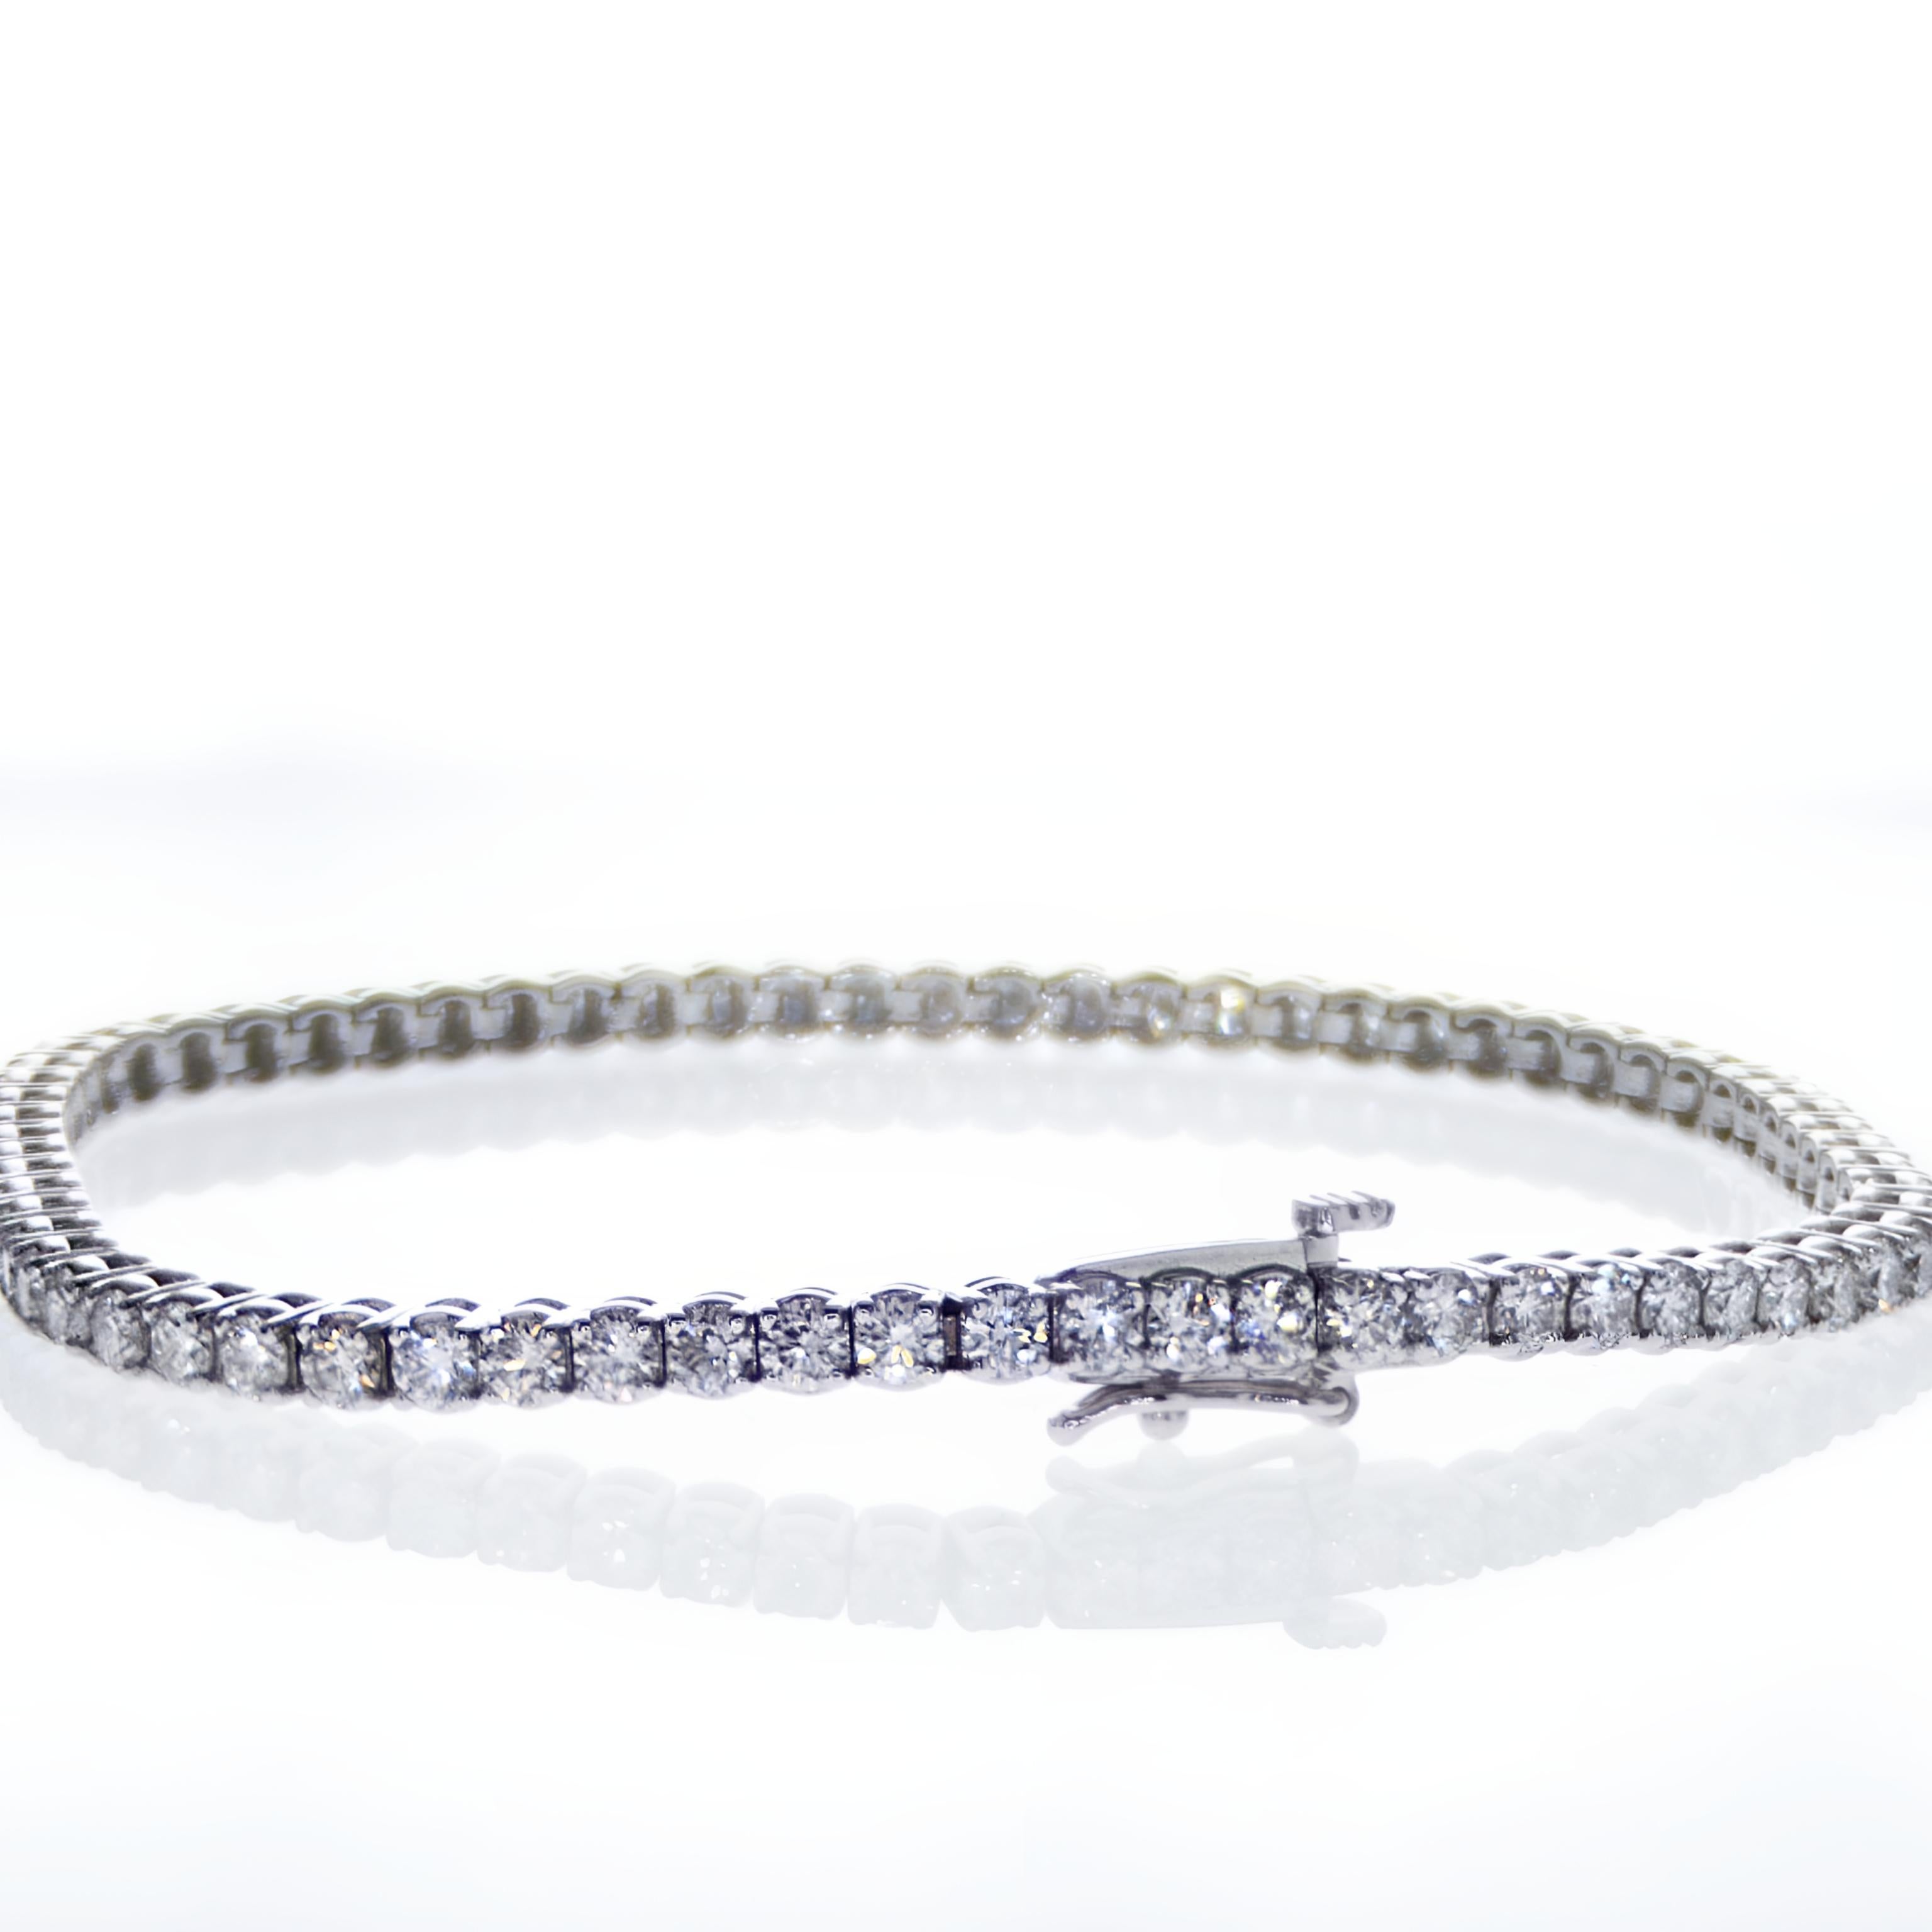 Luxurious Diamonds and 14K white Gold Tennis Bracelet

Product Description:

Introducing our White Gold Tennis Bracelet, an epitome of elegance and luxury. This remarkable tennis bracelet, crafted with utmost precision from 14K gold and adorned with